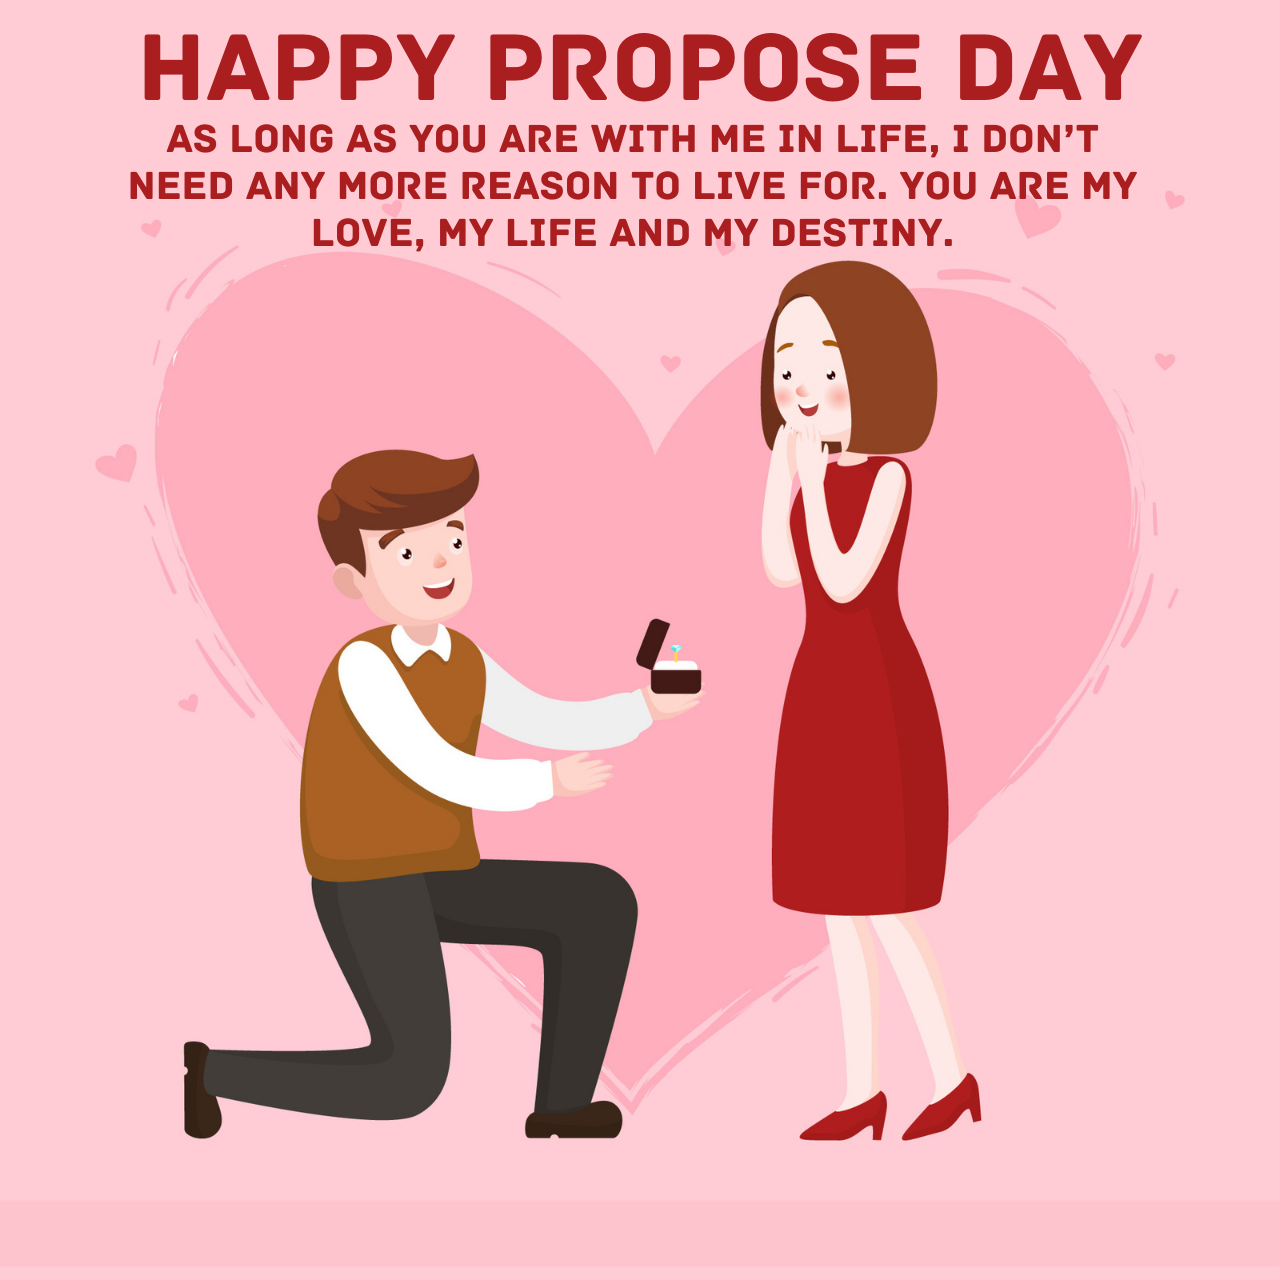 Happy Propose Day 2022: Wishes, Quotes, HD Images, Messages, Status,  Shayari to greet your love on